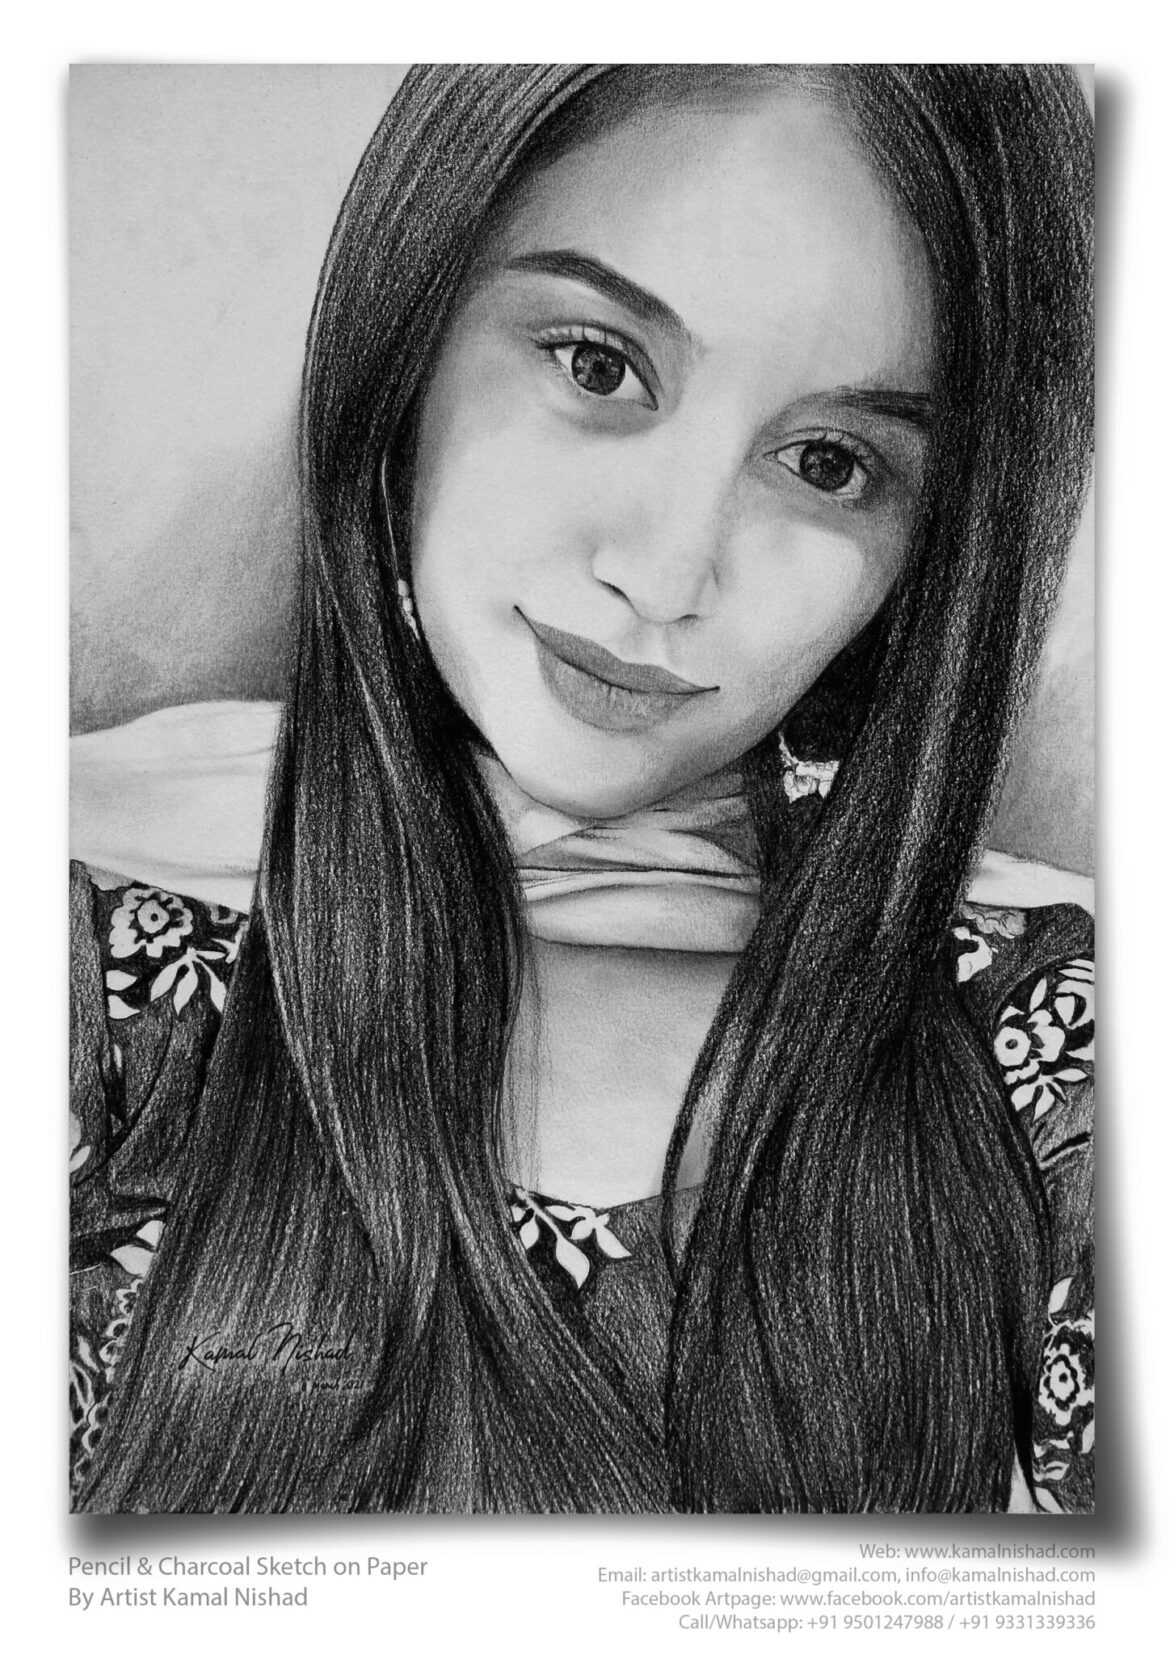 GORGEOUS GIRL | Pencil & Charcoal Sketch Title : GORGEOUS GIRL Medium : Pencil & Charcoal Sketch Size : A3 Paper size (Sketch size 29.7 x 42.0 cm*) Artist : Kamal Nishad This is a Handmade/hand-drawn Sketch made with Pencil & Charcoal “GORGEOUS GIRL”. This is a Gift from One of my Client to her friend. 💐 SIZE: Paper size A3 (work area 11.7 x 16.5 inches *estimated) Created by © Kamal Nishad. All rights reserved.